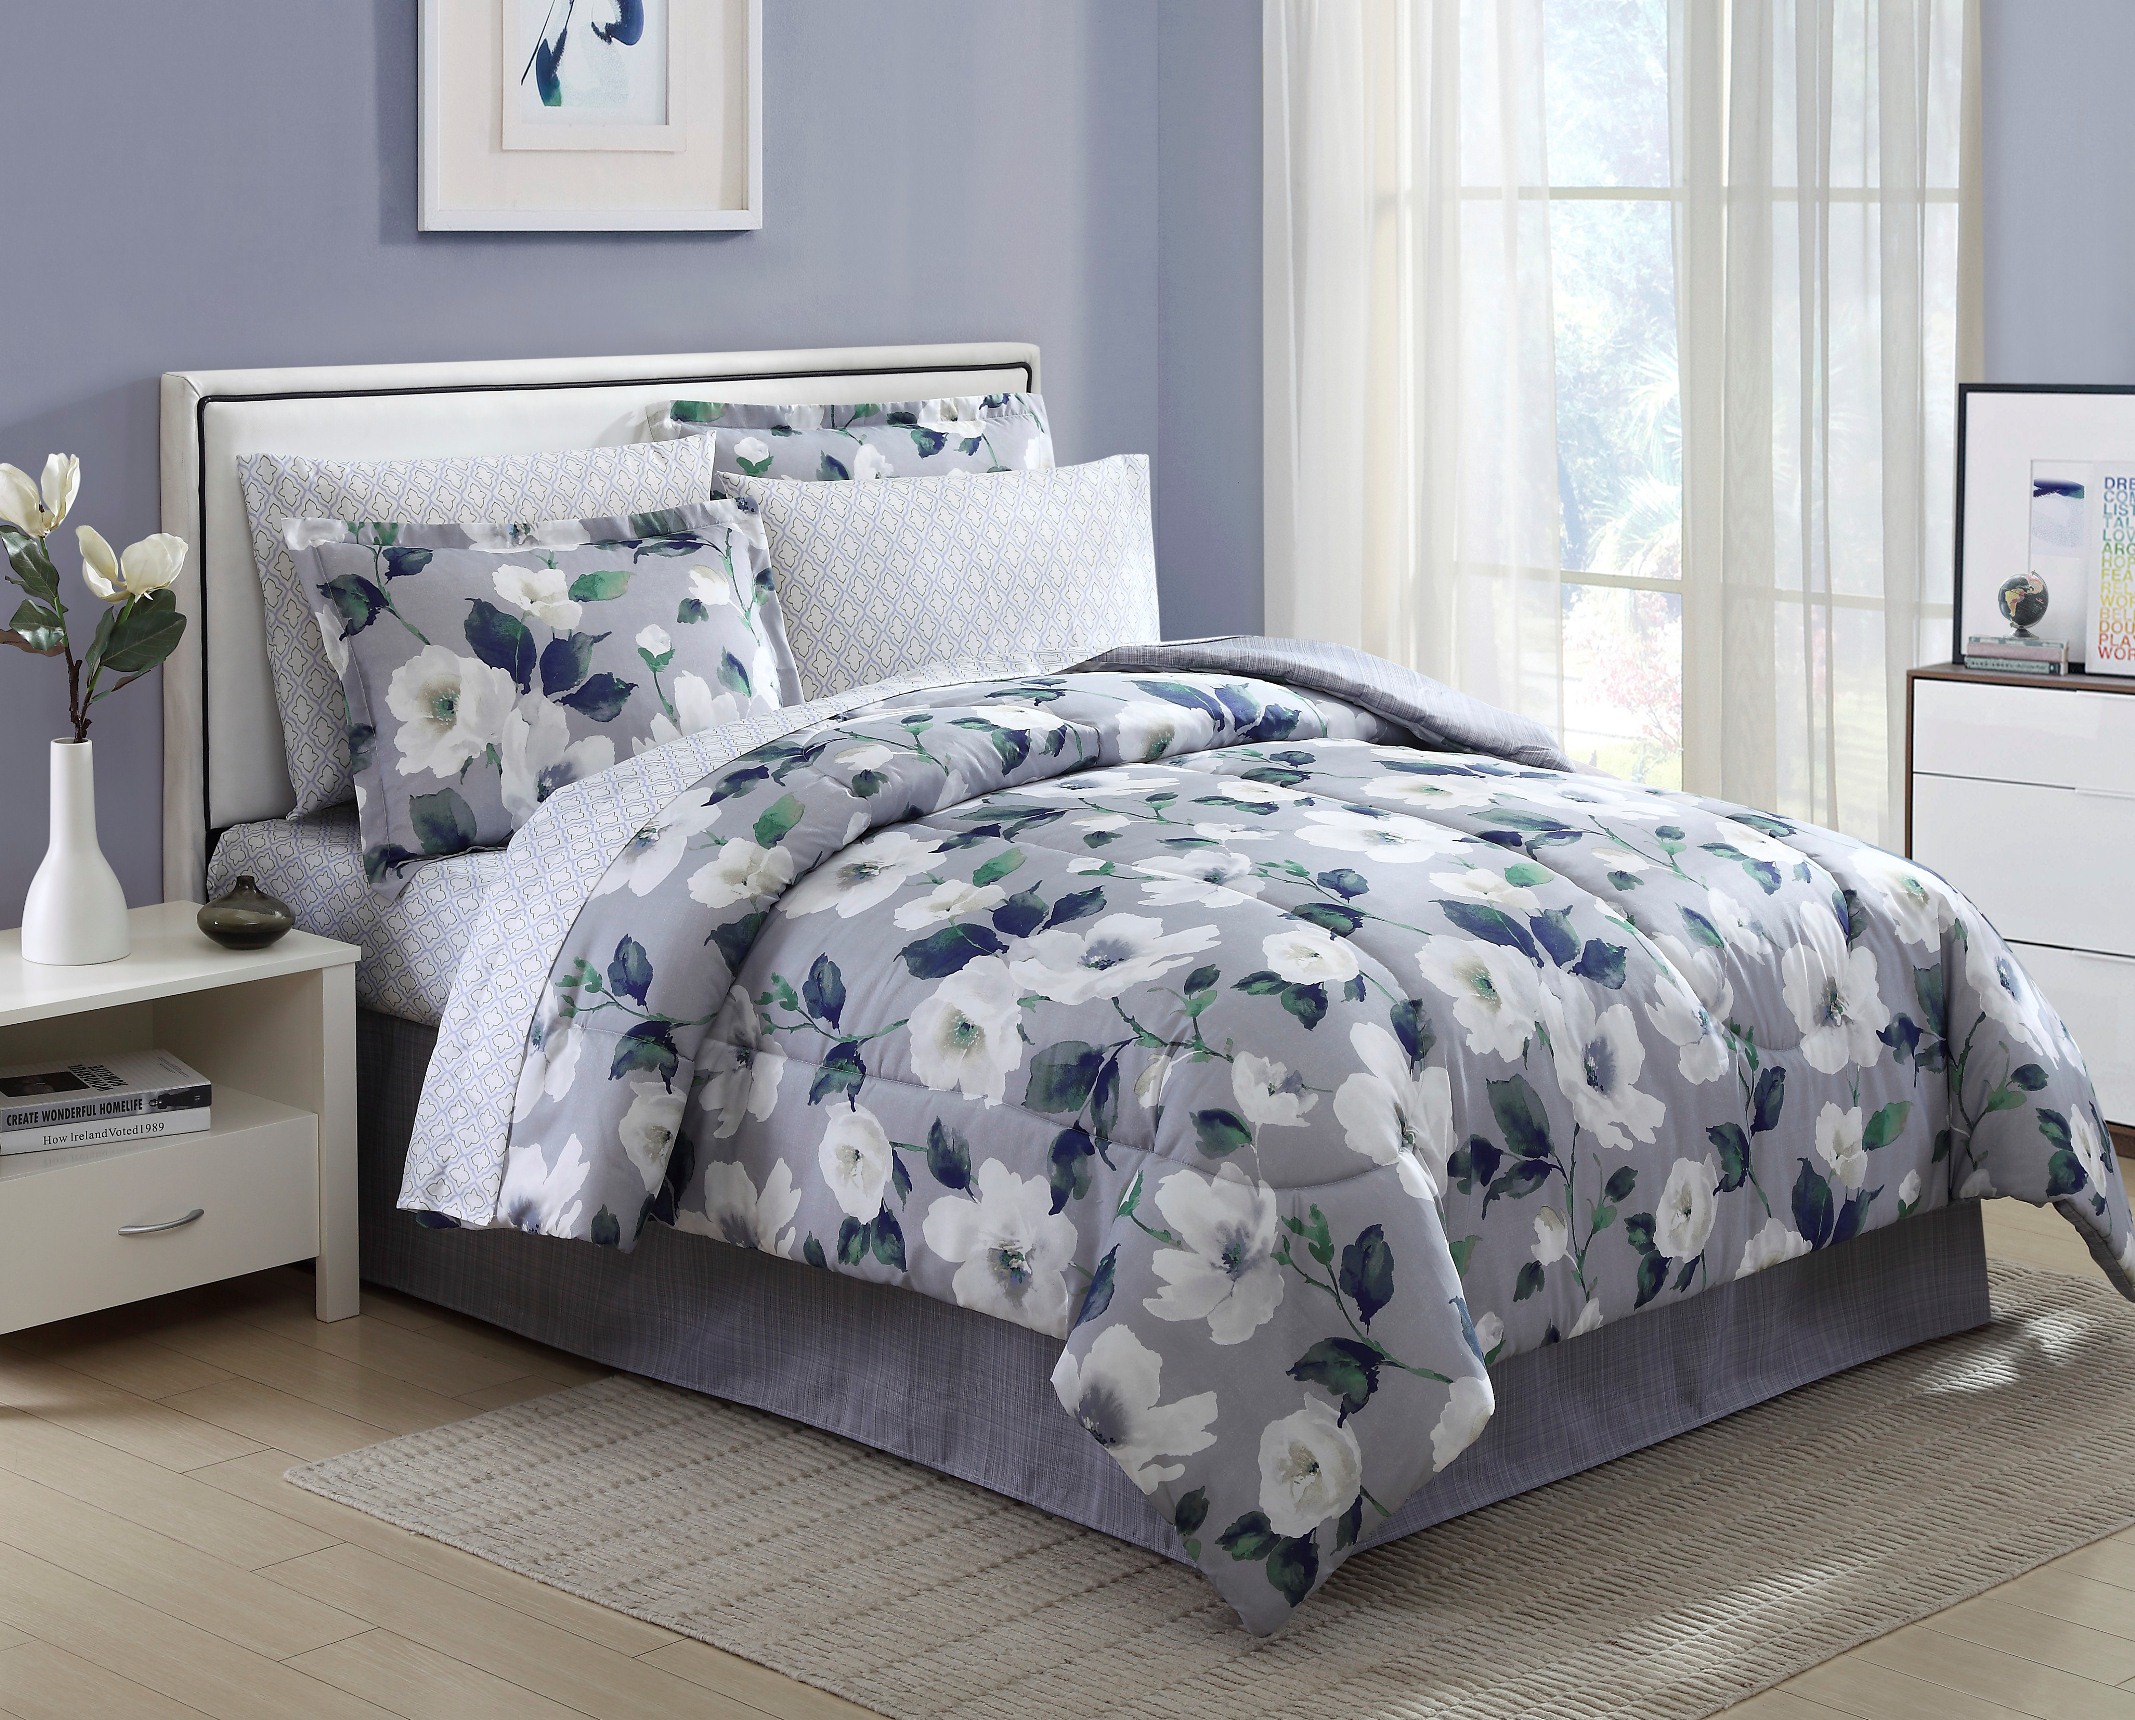 8-Piece Complete Bed Set - Blooming Floral